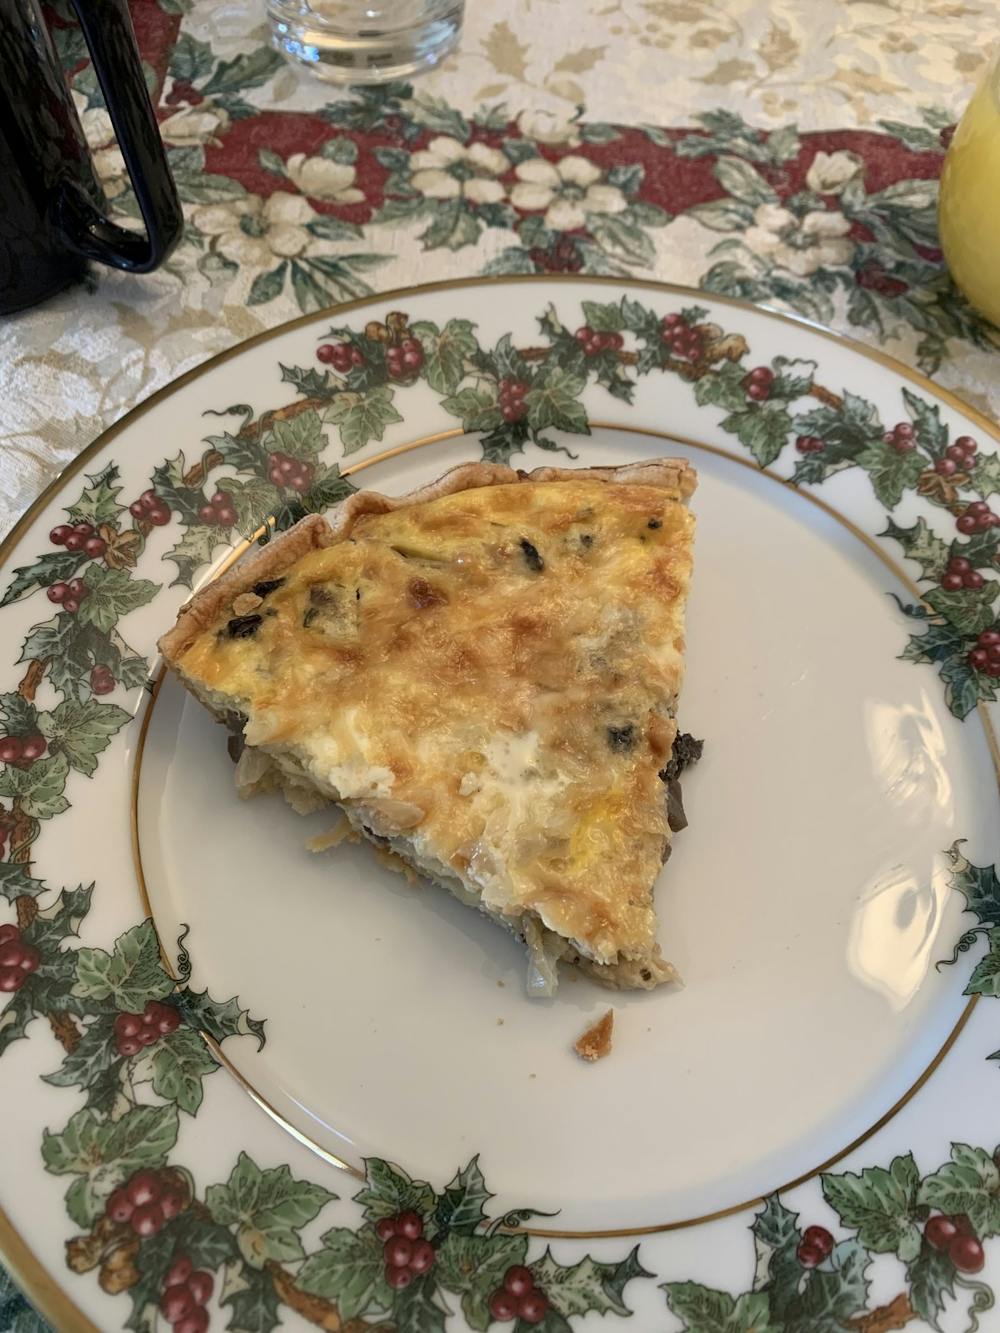 <p>This is a vegetarian-friendly, mushroom quiche variant of the quiche Lorraine recipe featured in the article.&nbsp;</p>